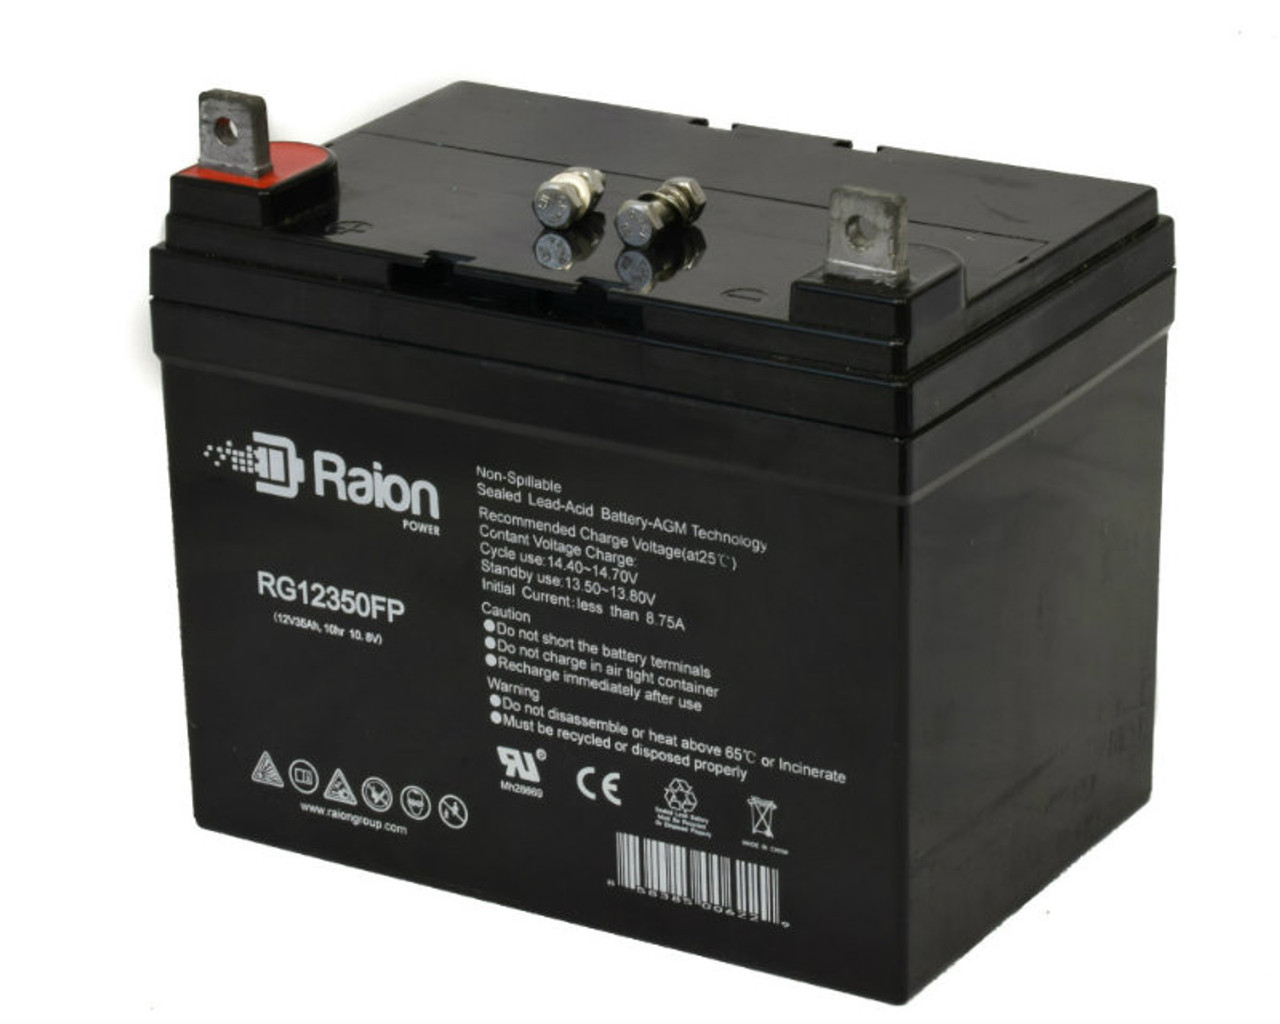 Raion Power Replacement 12V 35Ah RG12350FP Battery for Ford Motor Co. LGT100